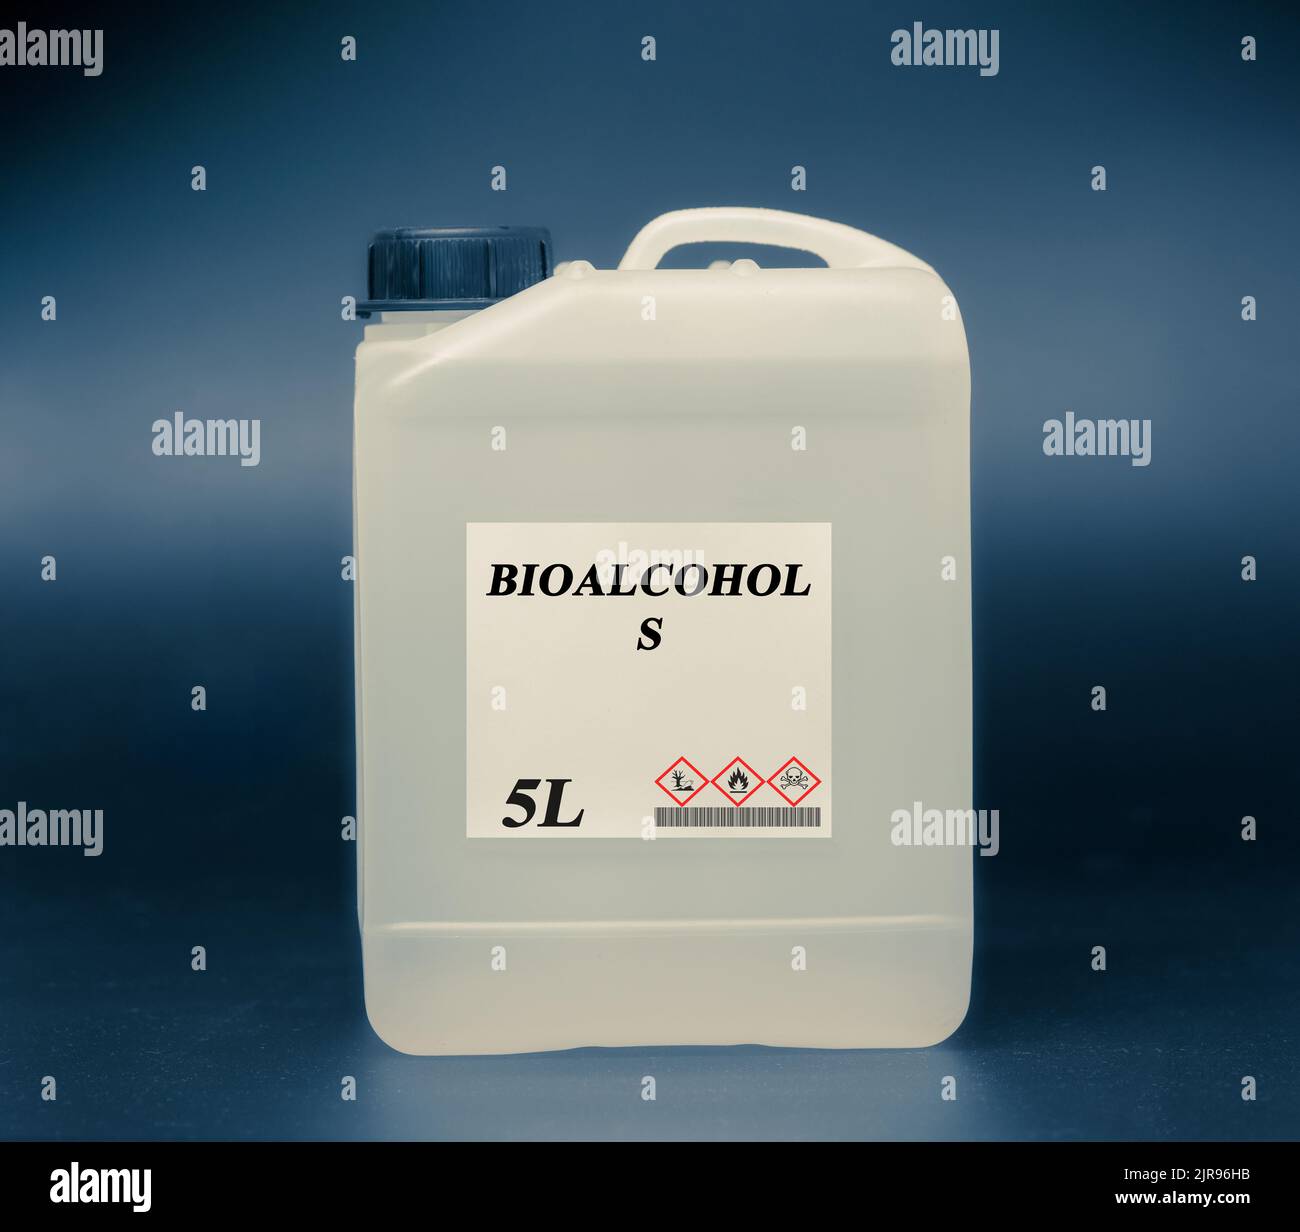 Biofuel in chemical lab in glass bottle Bioalcohols Stock Photo